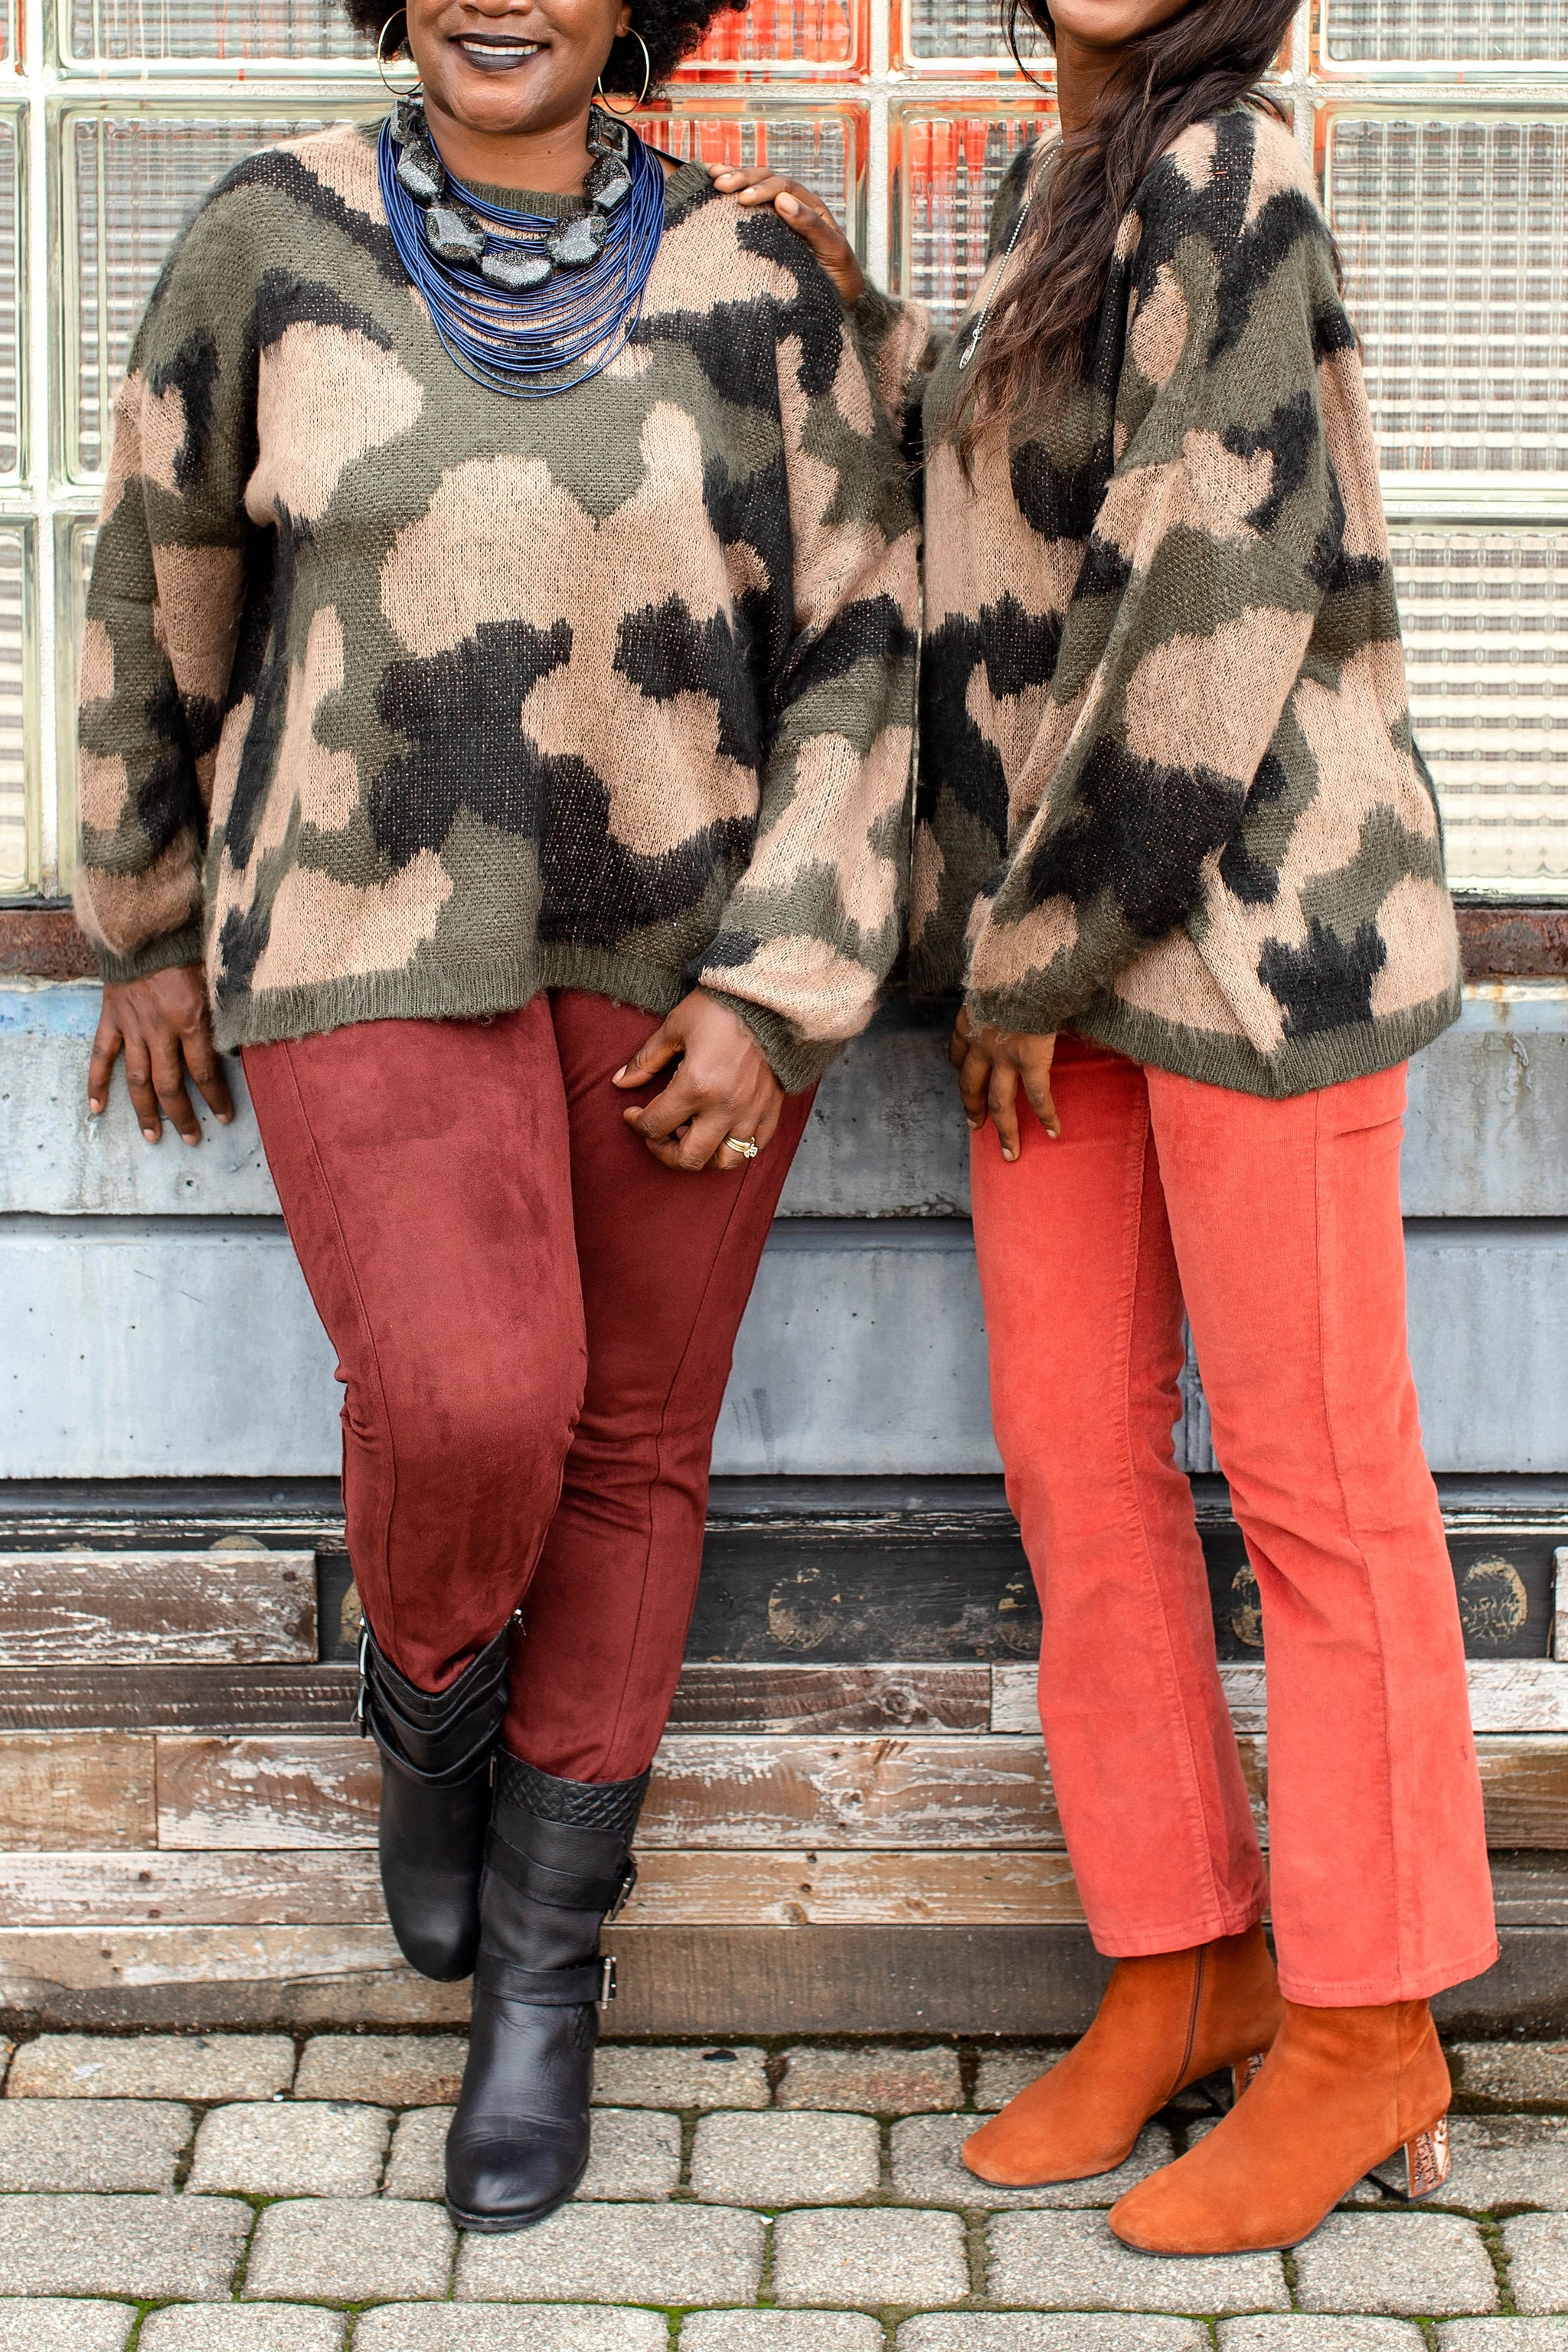 Sista Soldier Camouflage Sweater